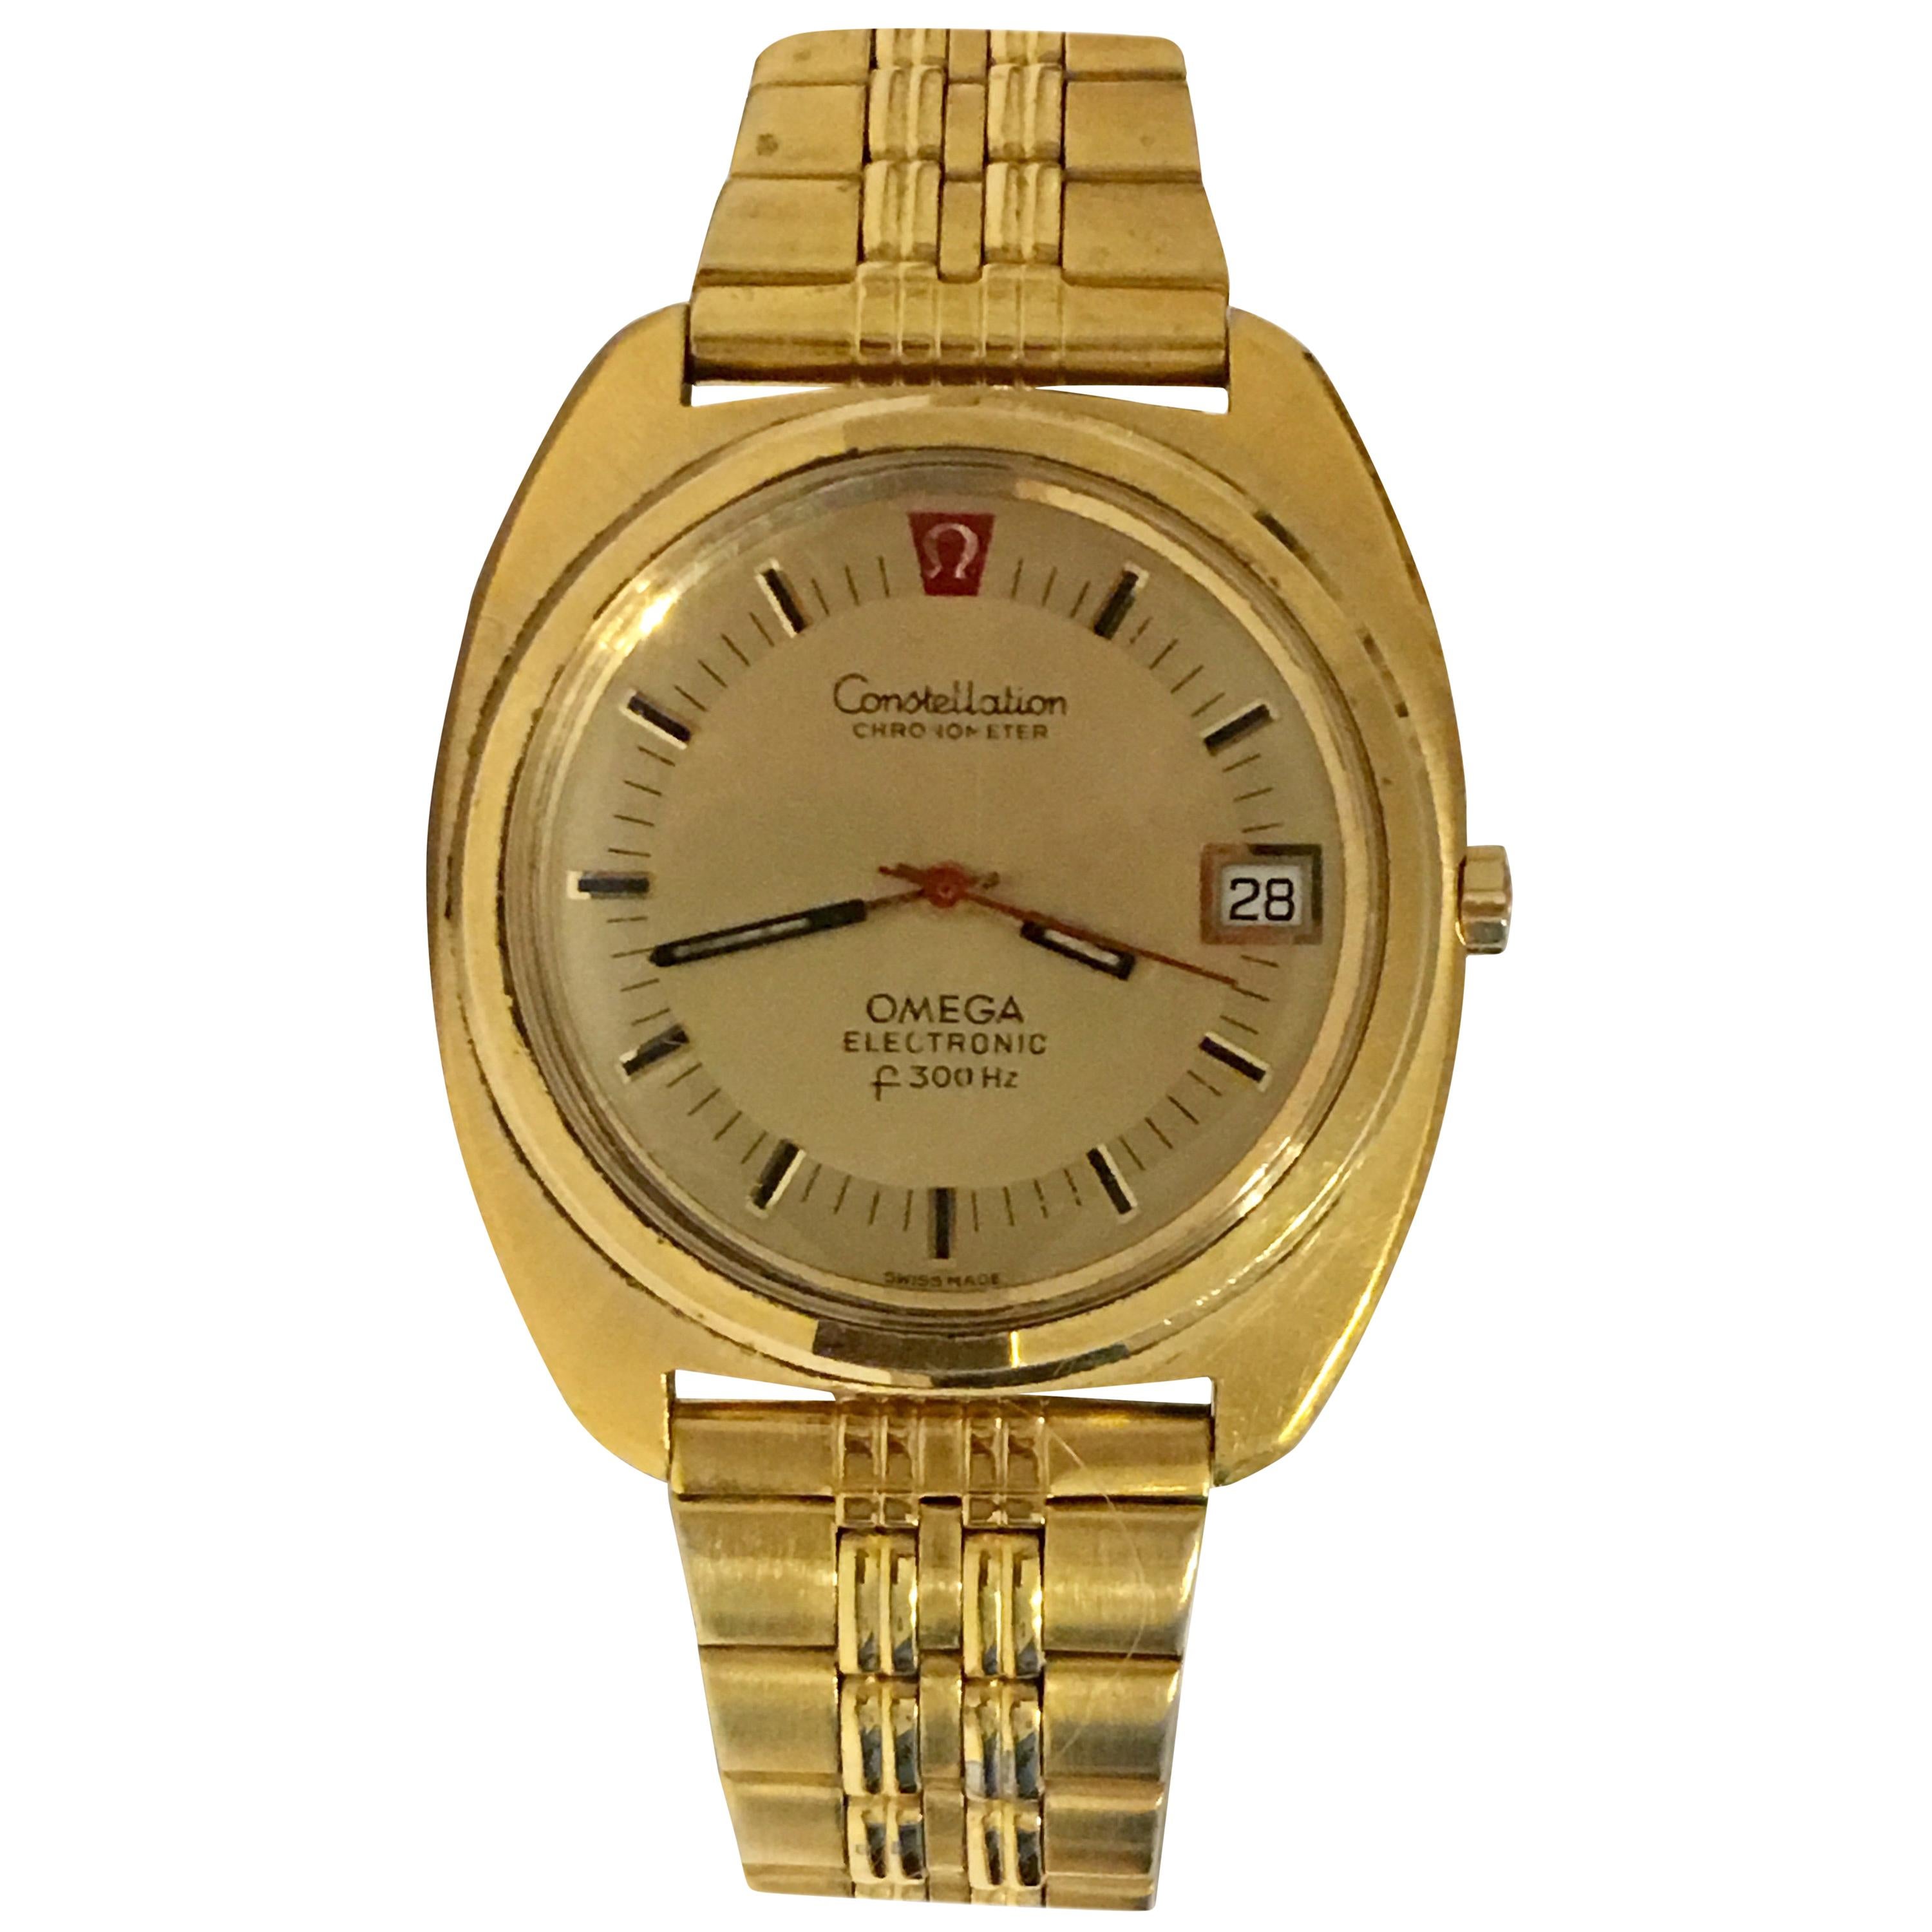 Vintage 1970s Omega Constellation F300HZ Gold-Plated Electronic Watch